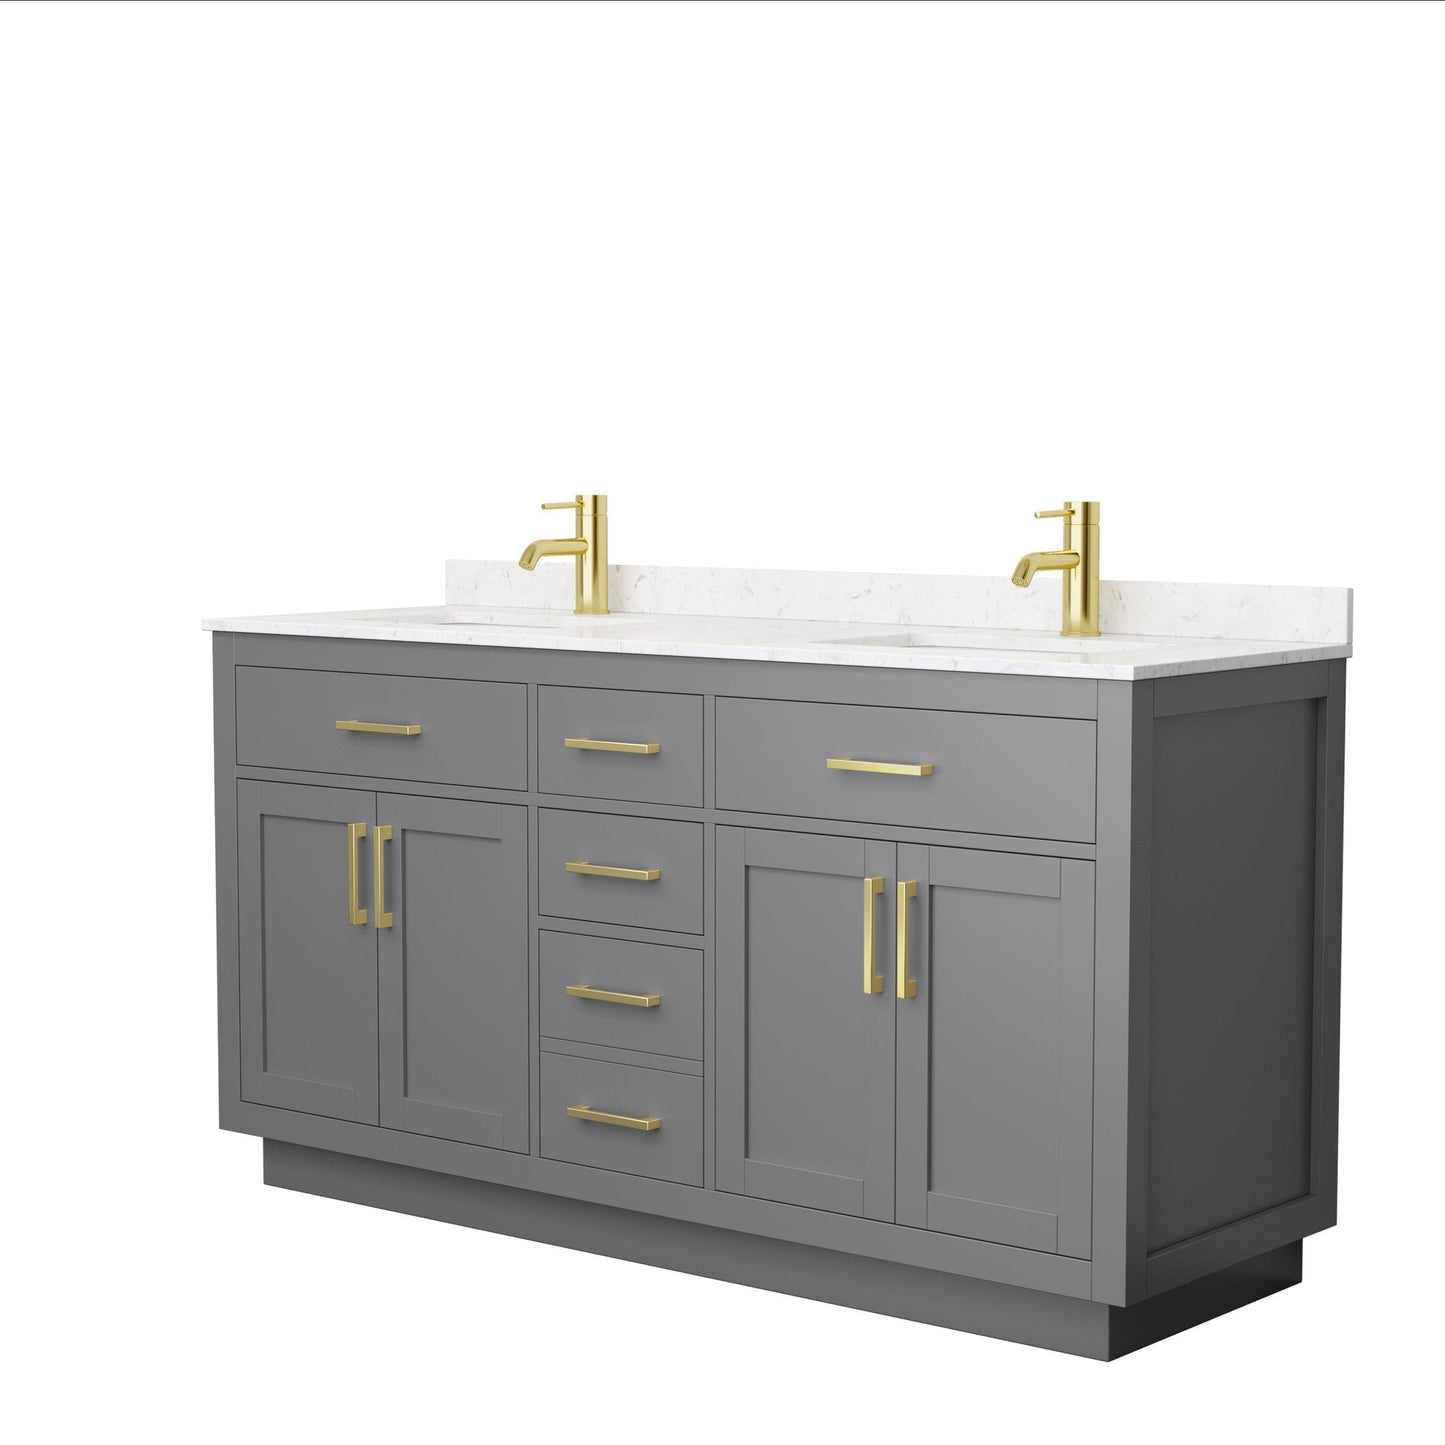 Beckett 66" Double Bathroom Vanity With Toe Kick in Dark Gray, Carrara Cultured Marble Countertop, Undermount Square Sinks, Brushed Gold Trim